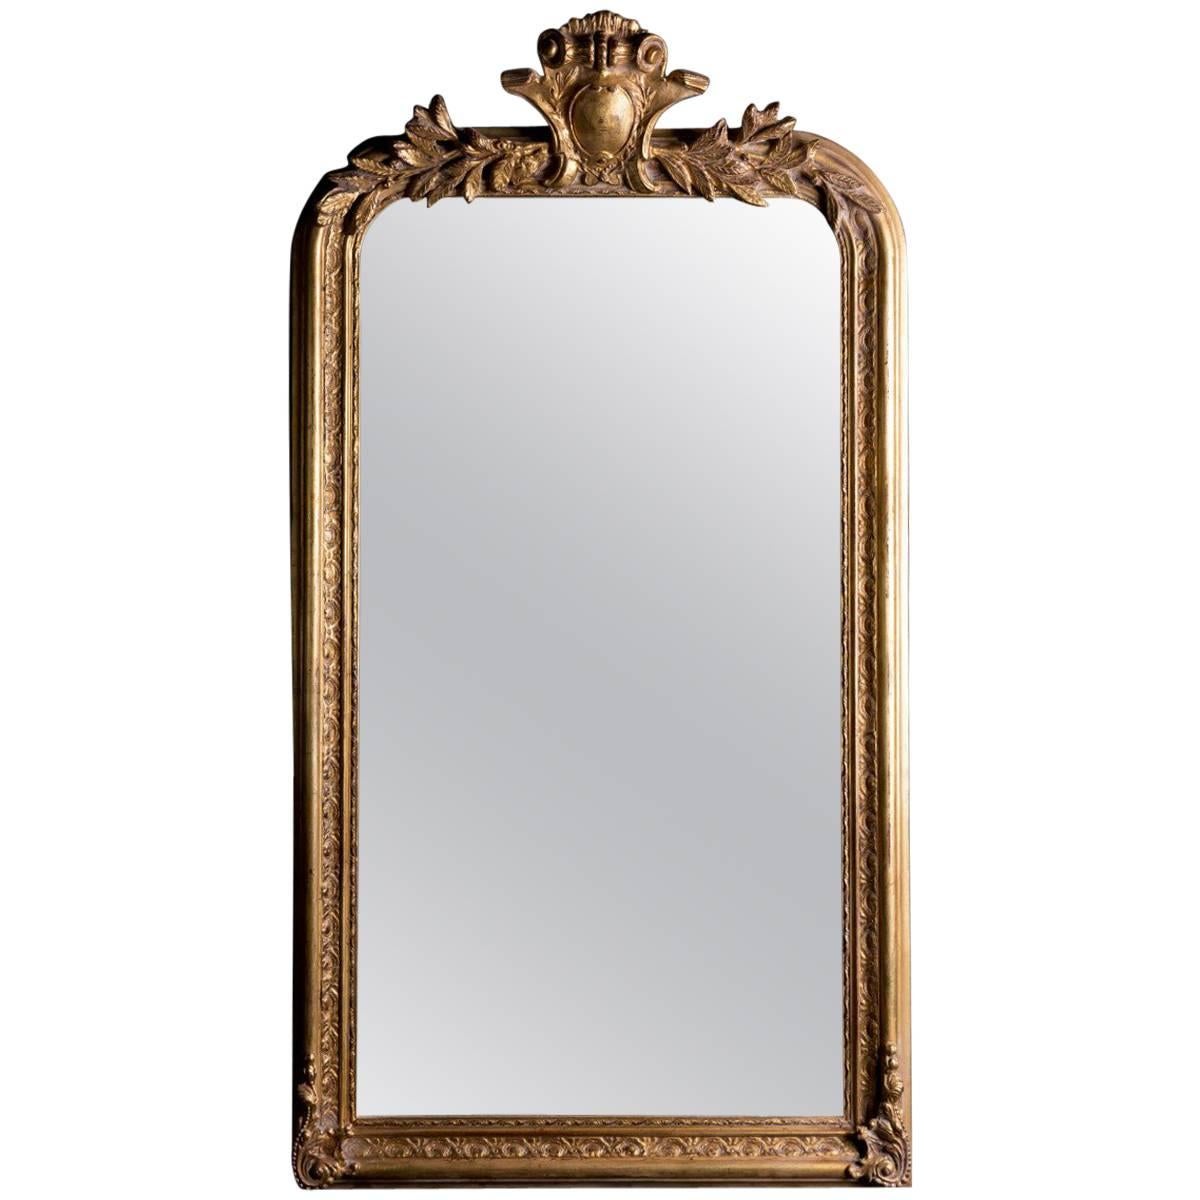 Philippe Hand-Carved Beveled Mirror in Hand Gilt Frame